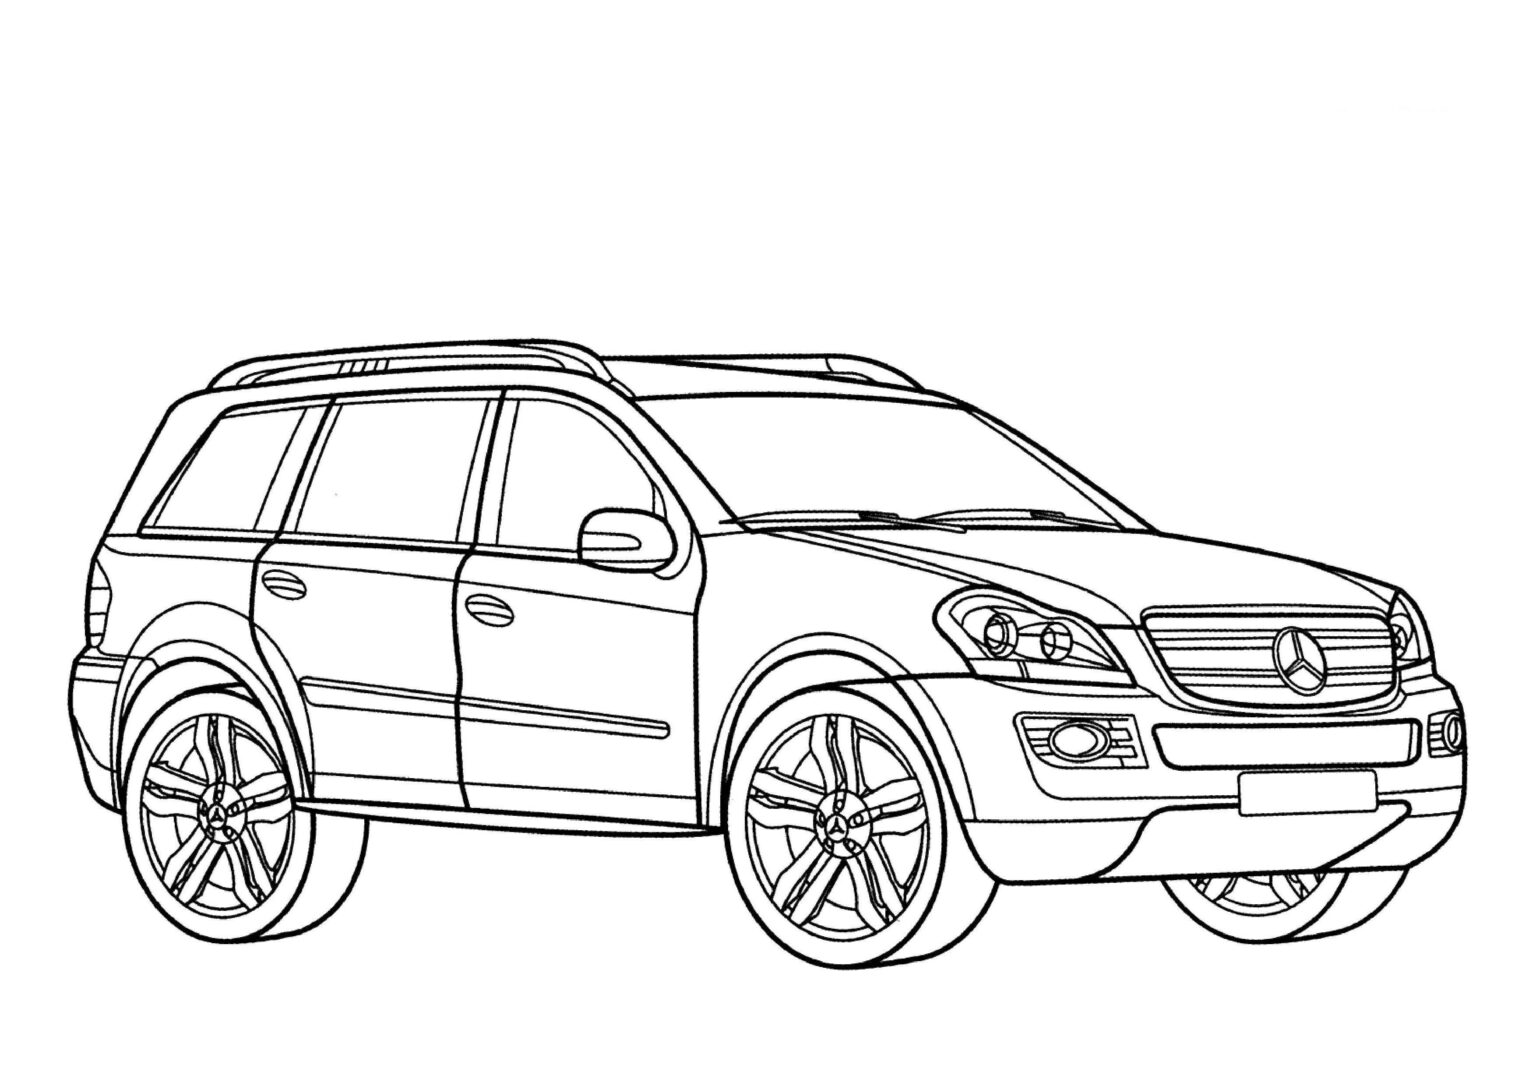 Mercedes GLC coloring book to print and online